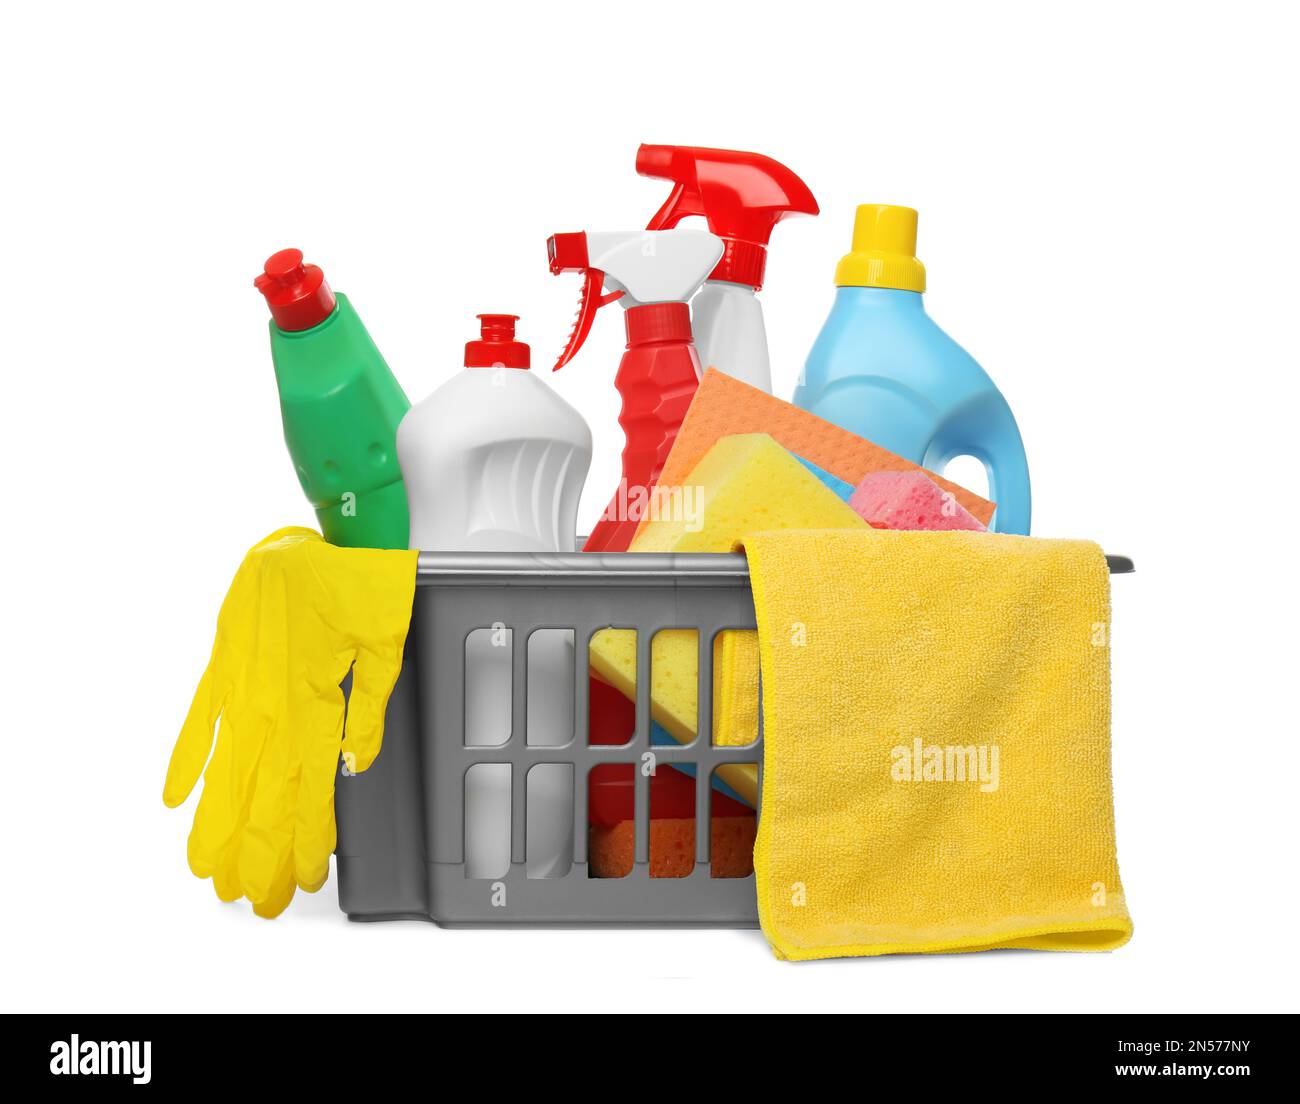 https://c8.alamy.com/comp/2N577NY/basket-with-different-cleaning-products-and-tools-on-white-background-2N577NY.jpg